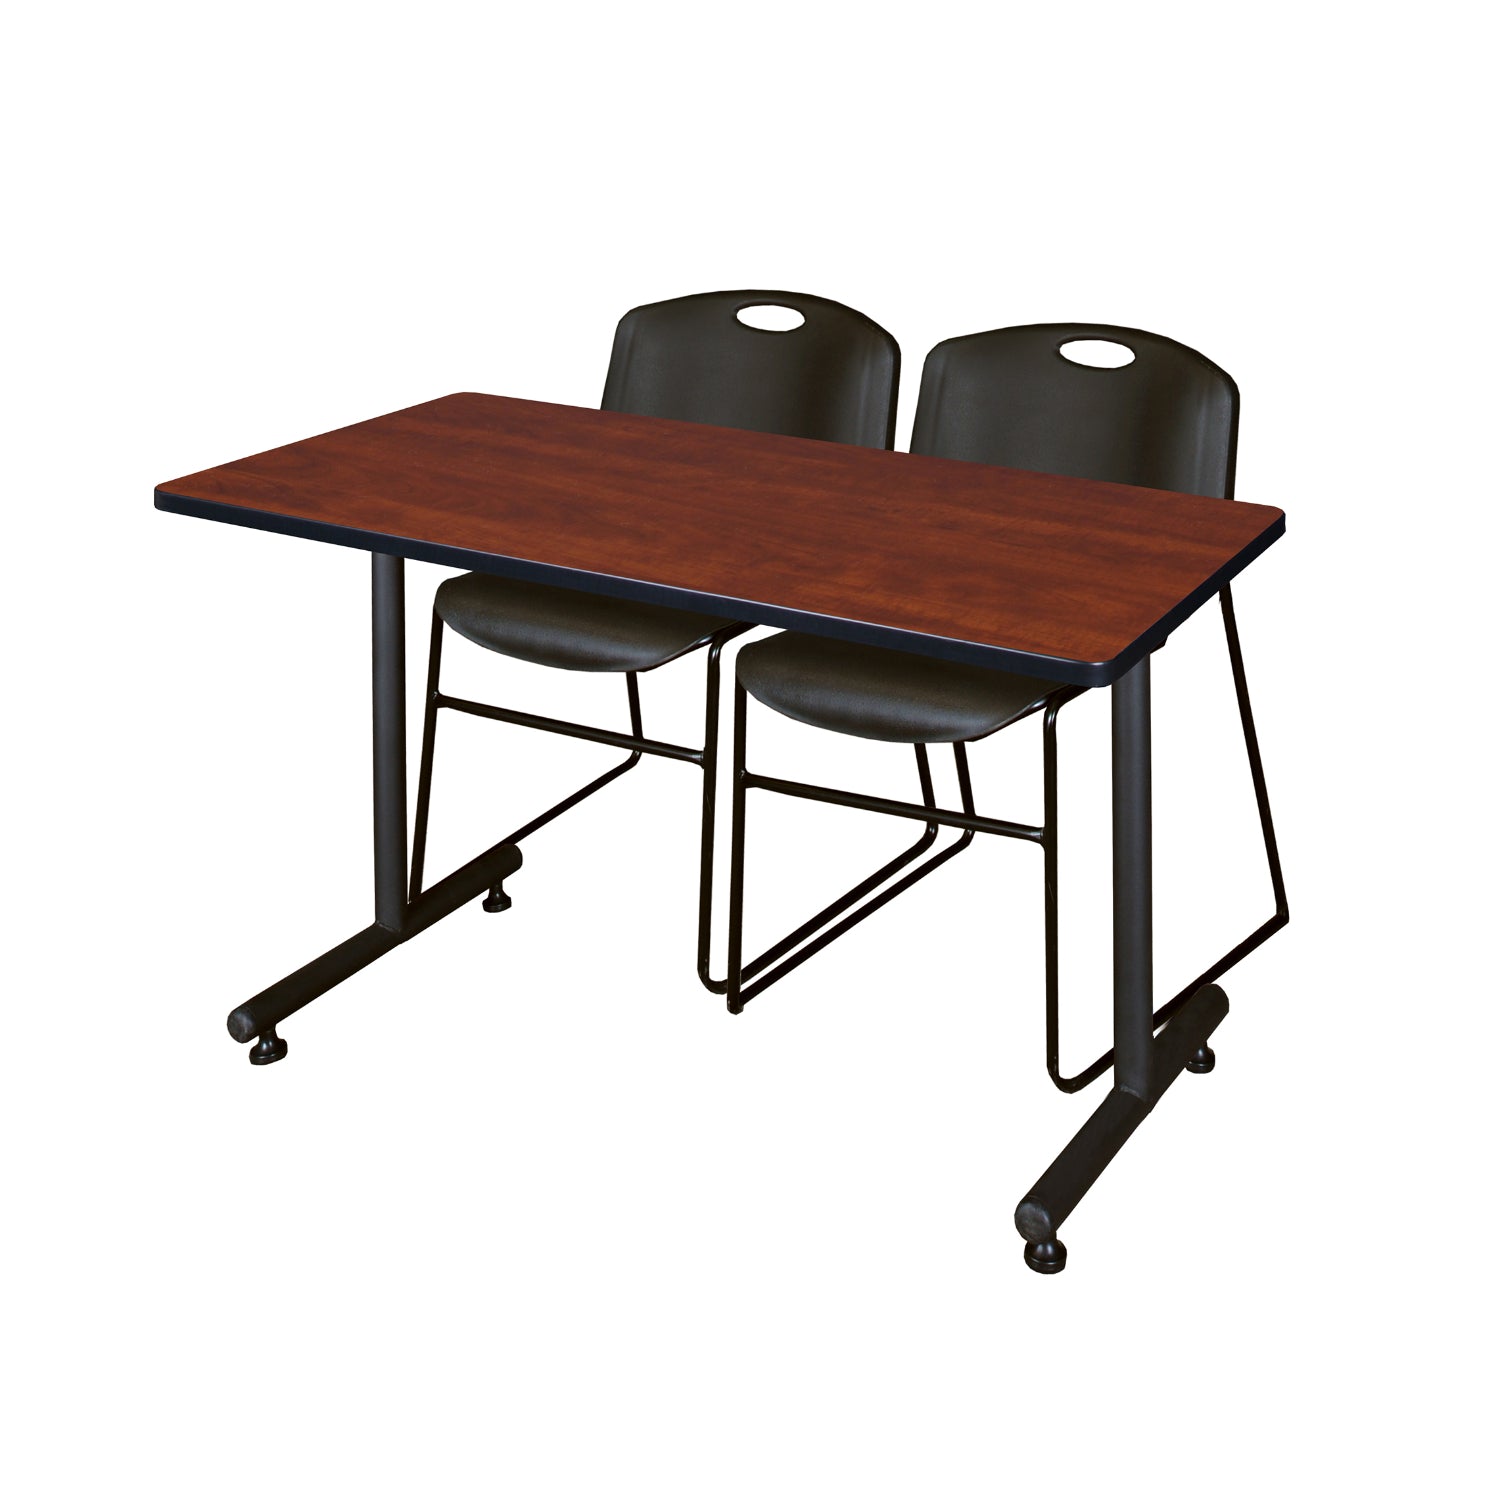 Kobe Training Table and Chair Package, Kobe 48" x 30" T-Base Training/Seminar Table with 2 Zeng Stack Chairs